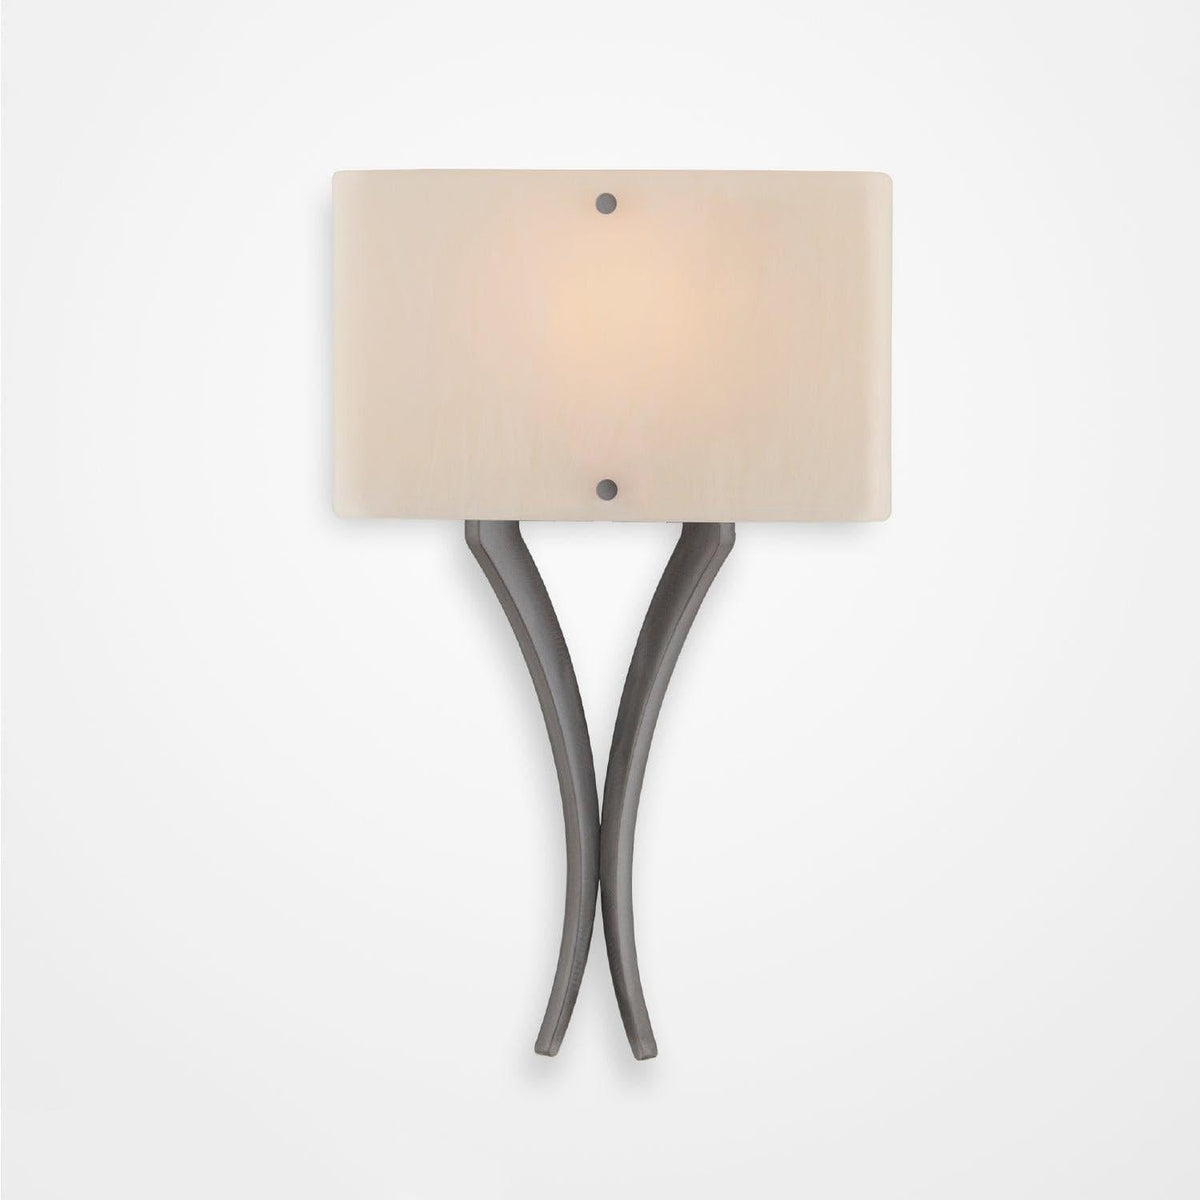 Hammerton Studio - Carlyle Vertex Cover Sconce - CSB0033-0A-SN-IW-E2 | Montreal Lighting & Hardware